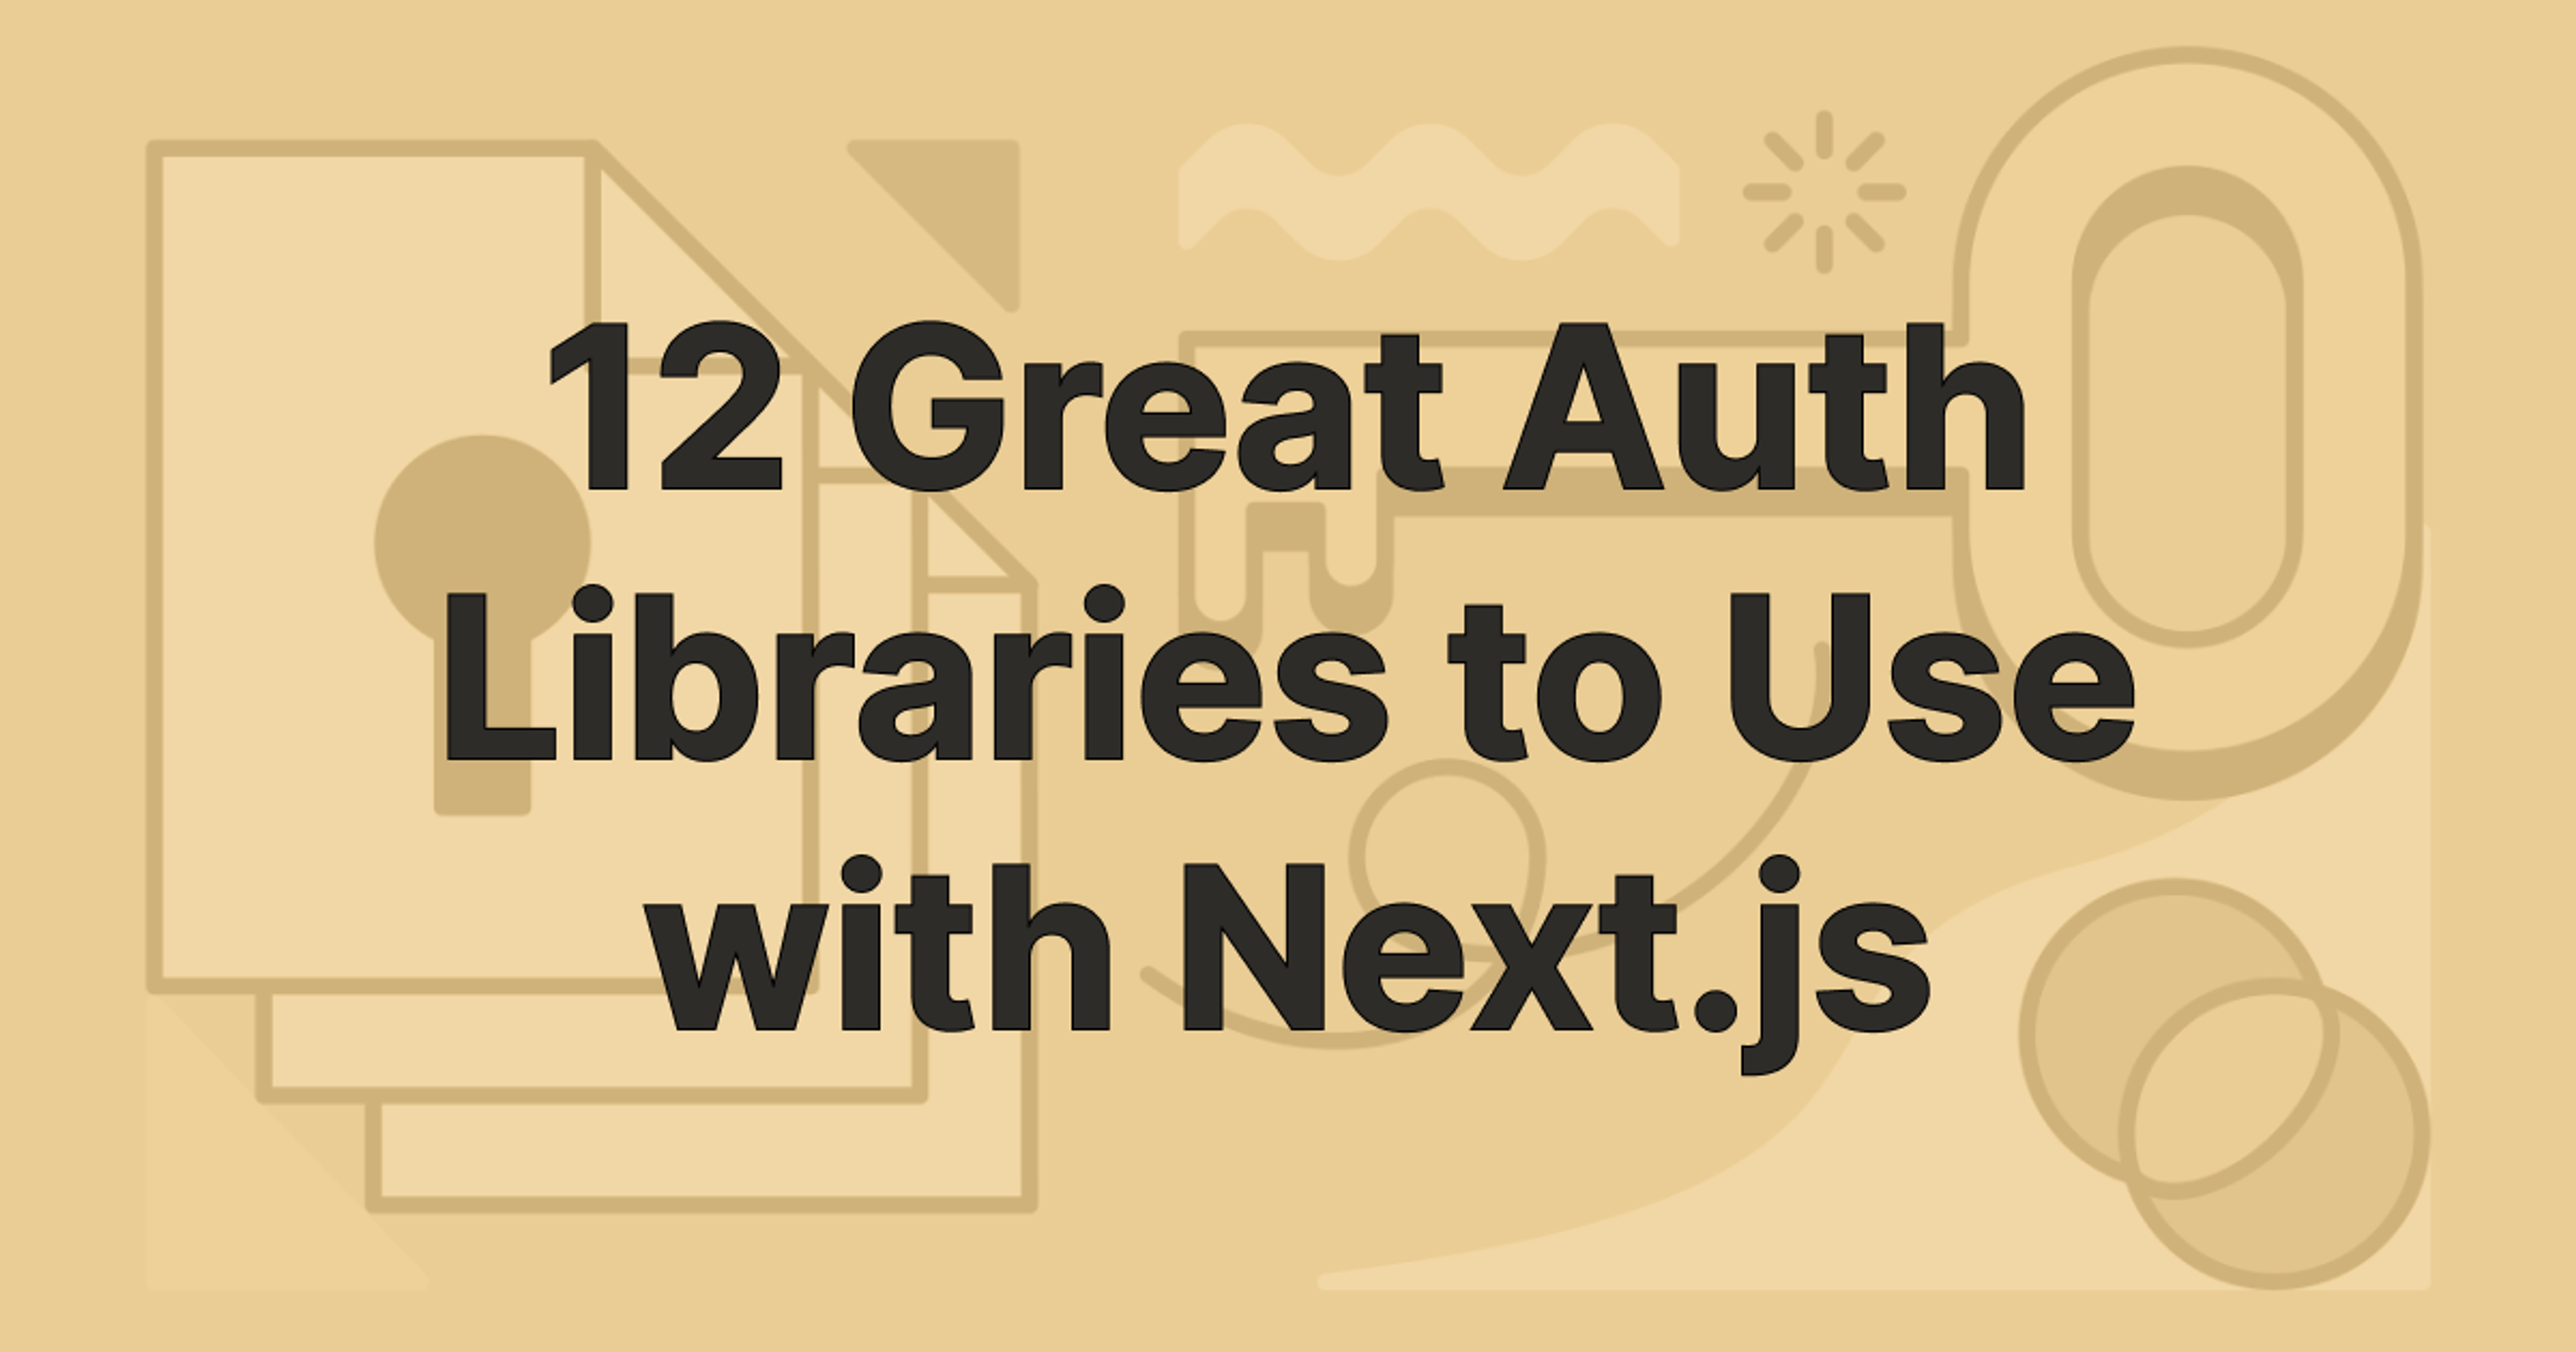 12 Great Auth Libraries to Use with Next.js